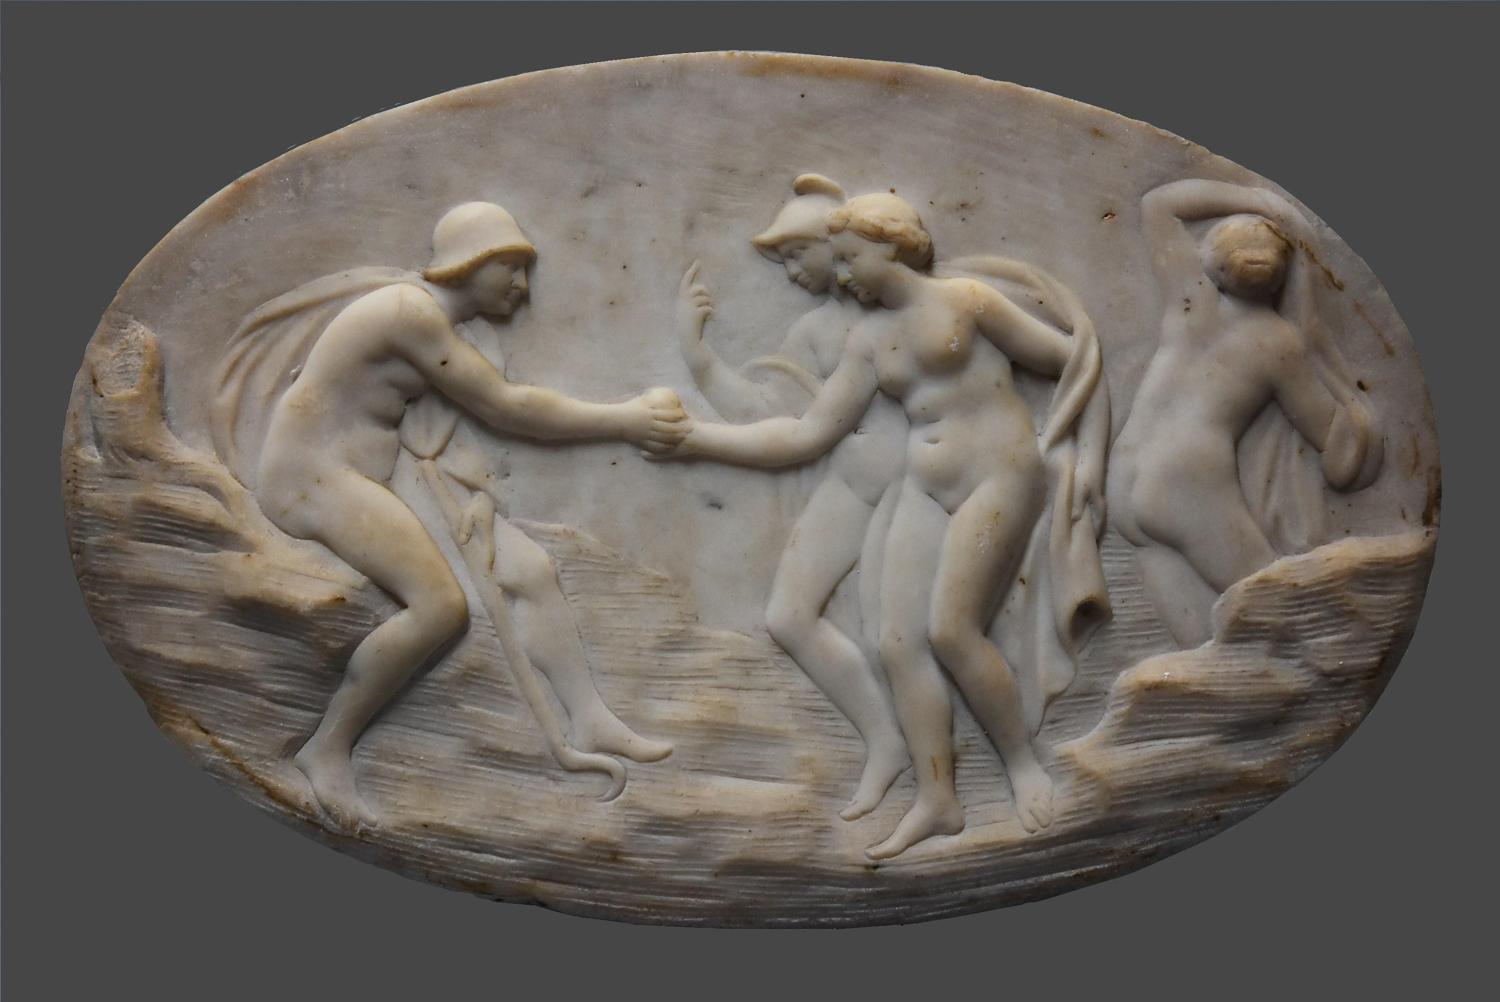 18th century carrara marble oval plaque of a Classical scene